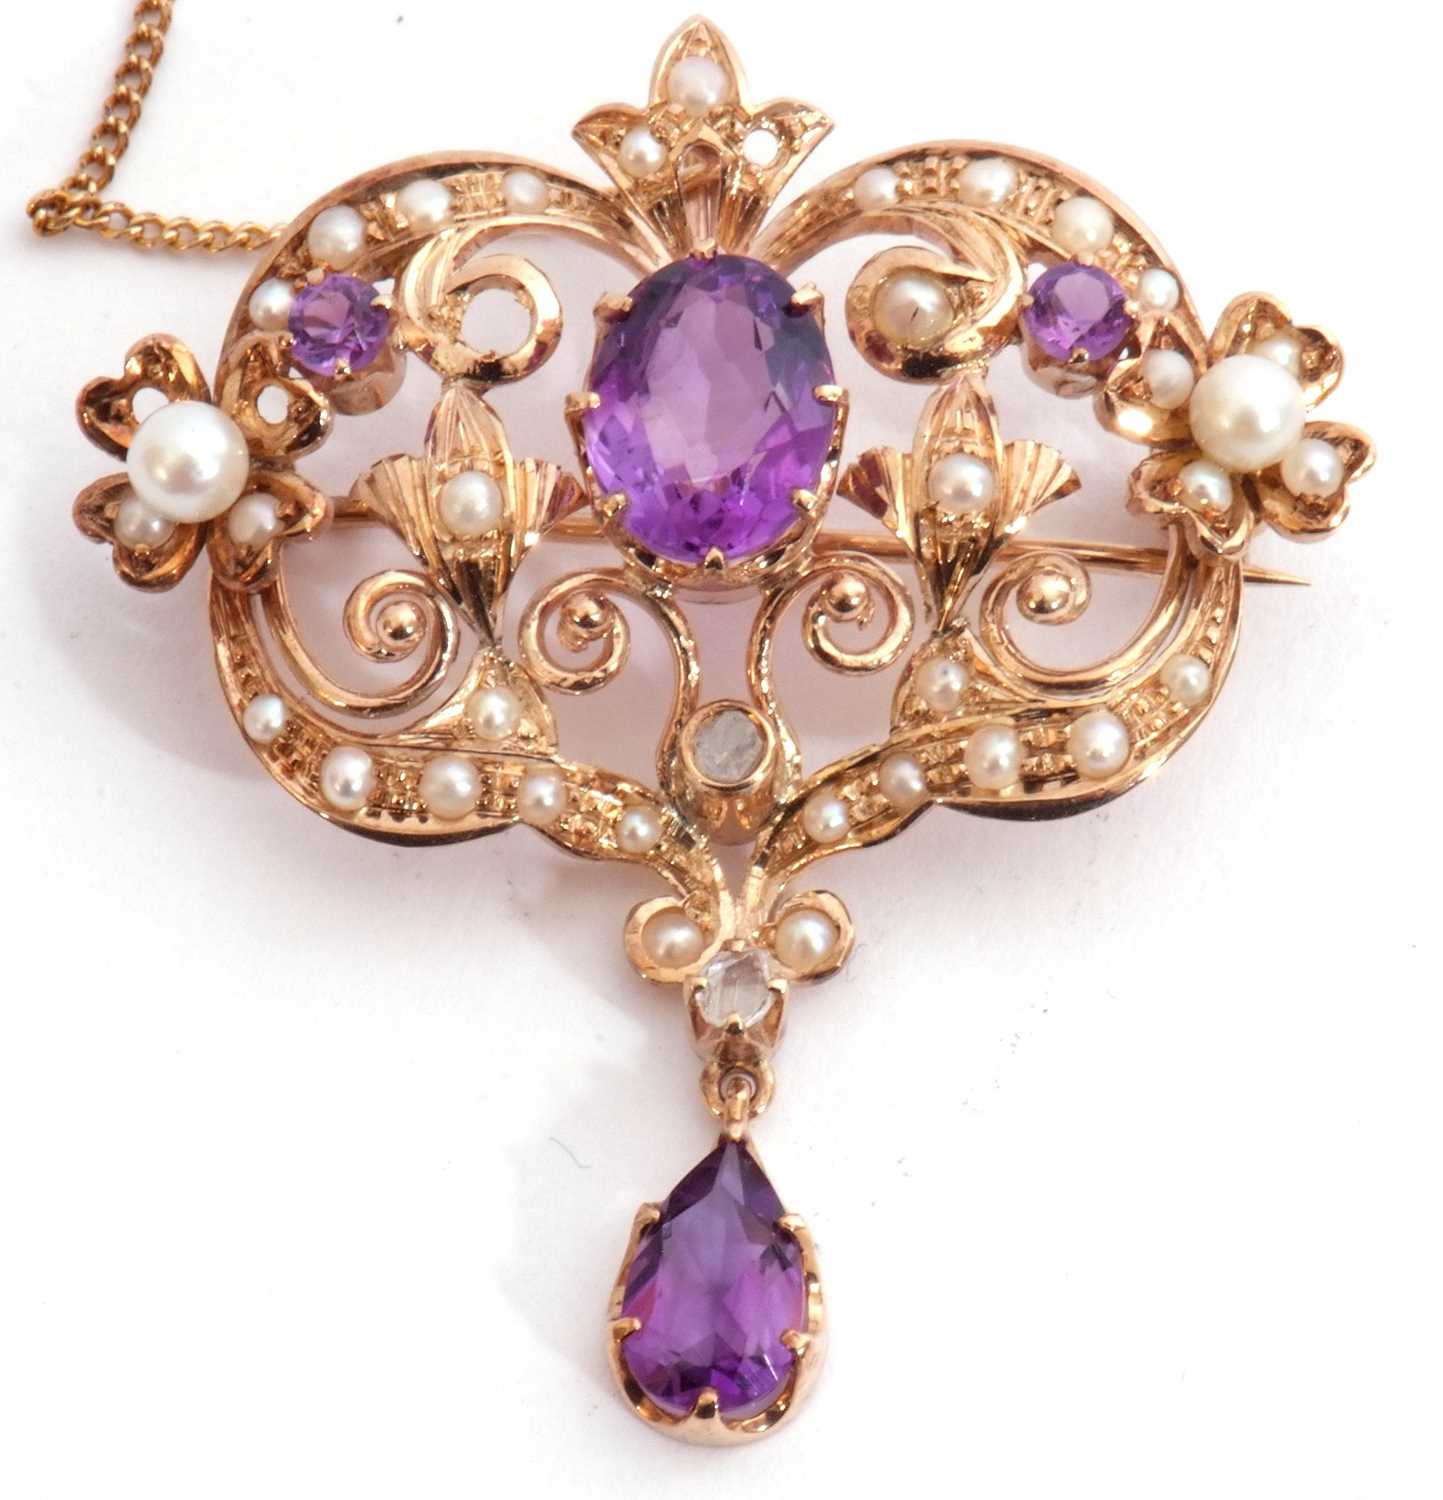 Amethyst, pearl and diamond open work brooch/pendant centring an oval faceted amethyst raised in